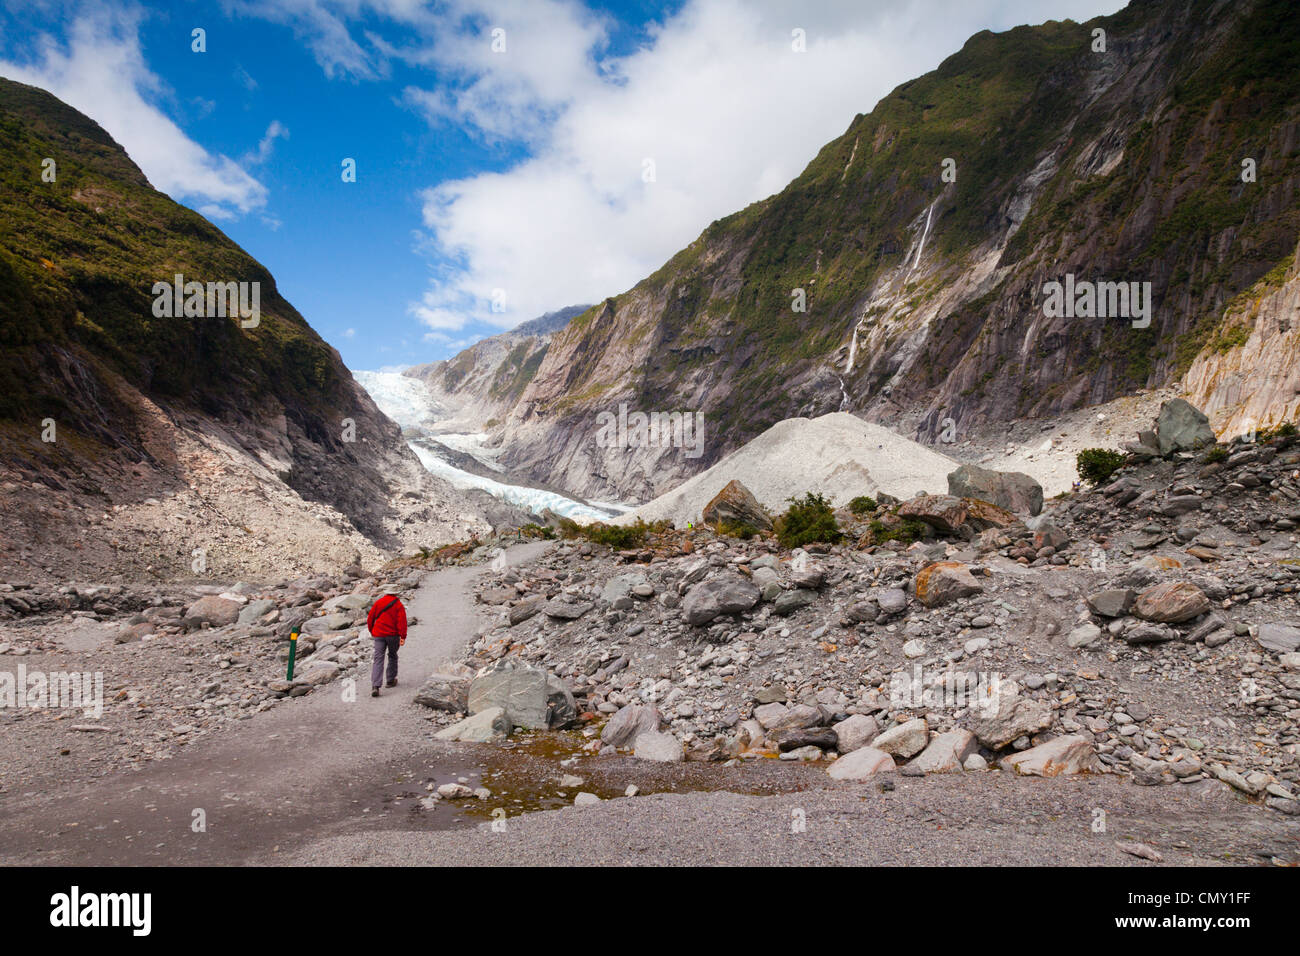 Man walking up track to Franz Josef Glacier, West Coast, New Zealand. Model release available for man. Stock Photo